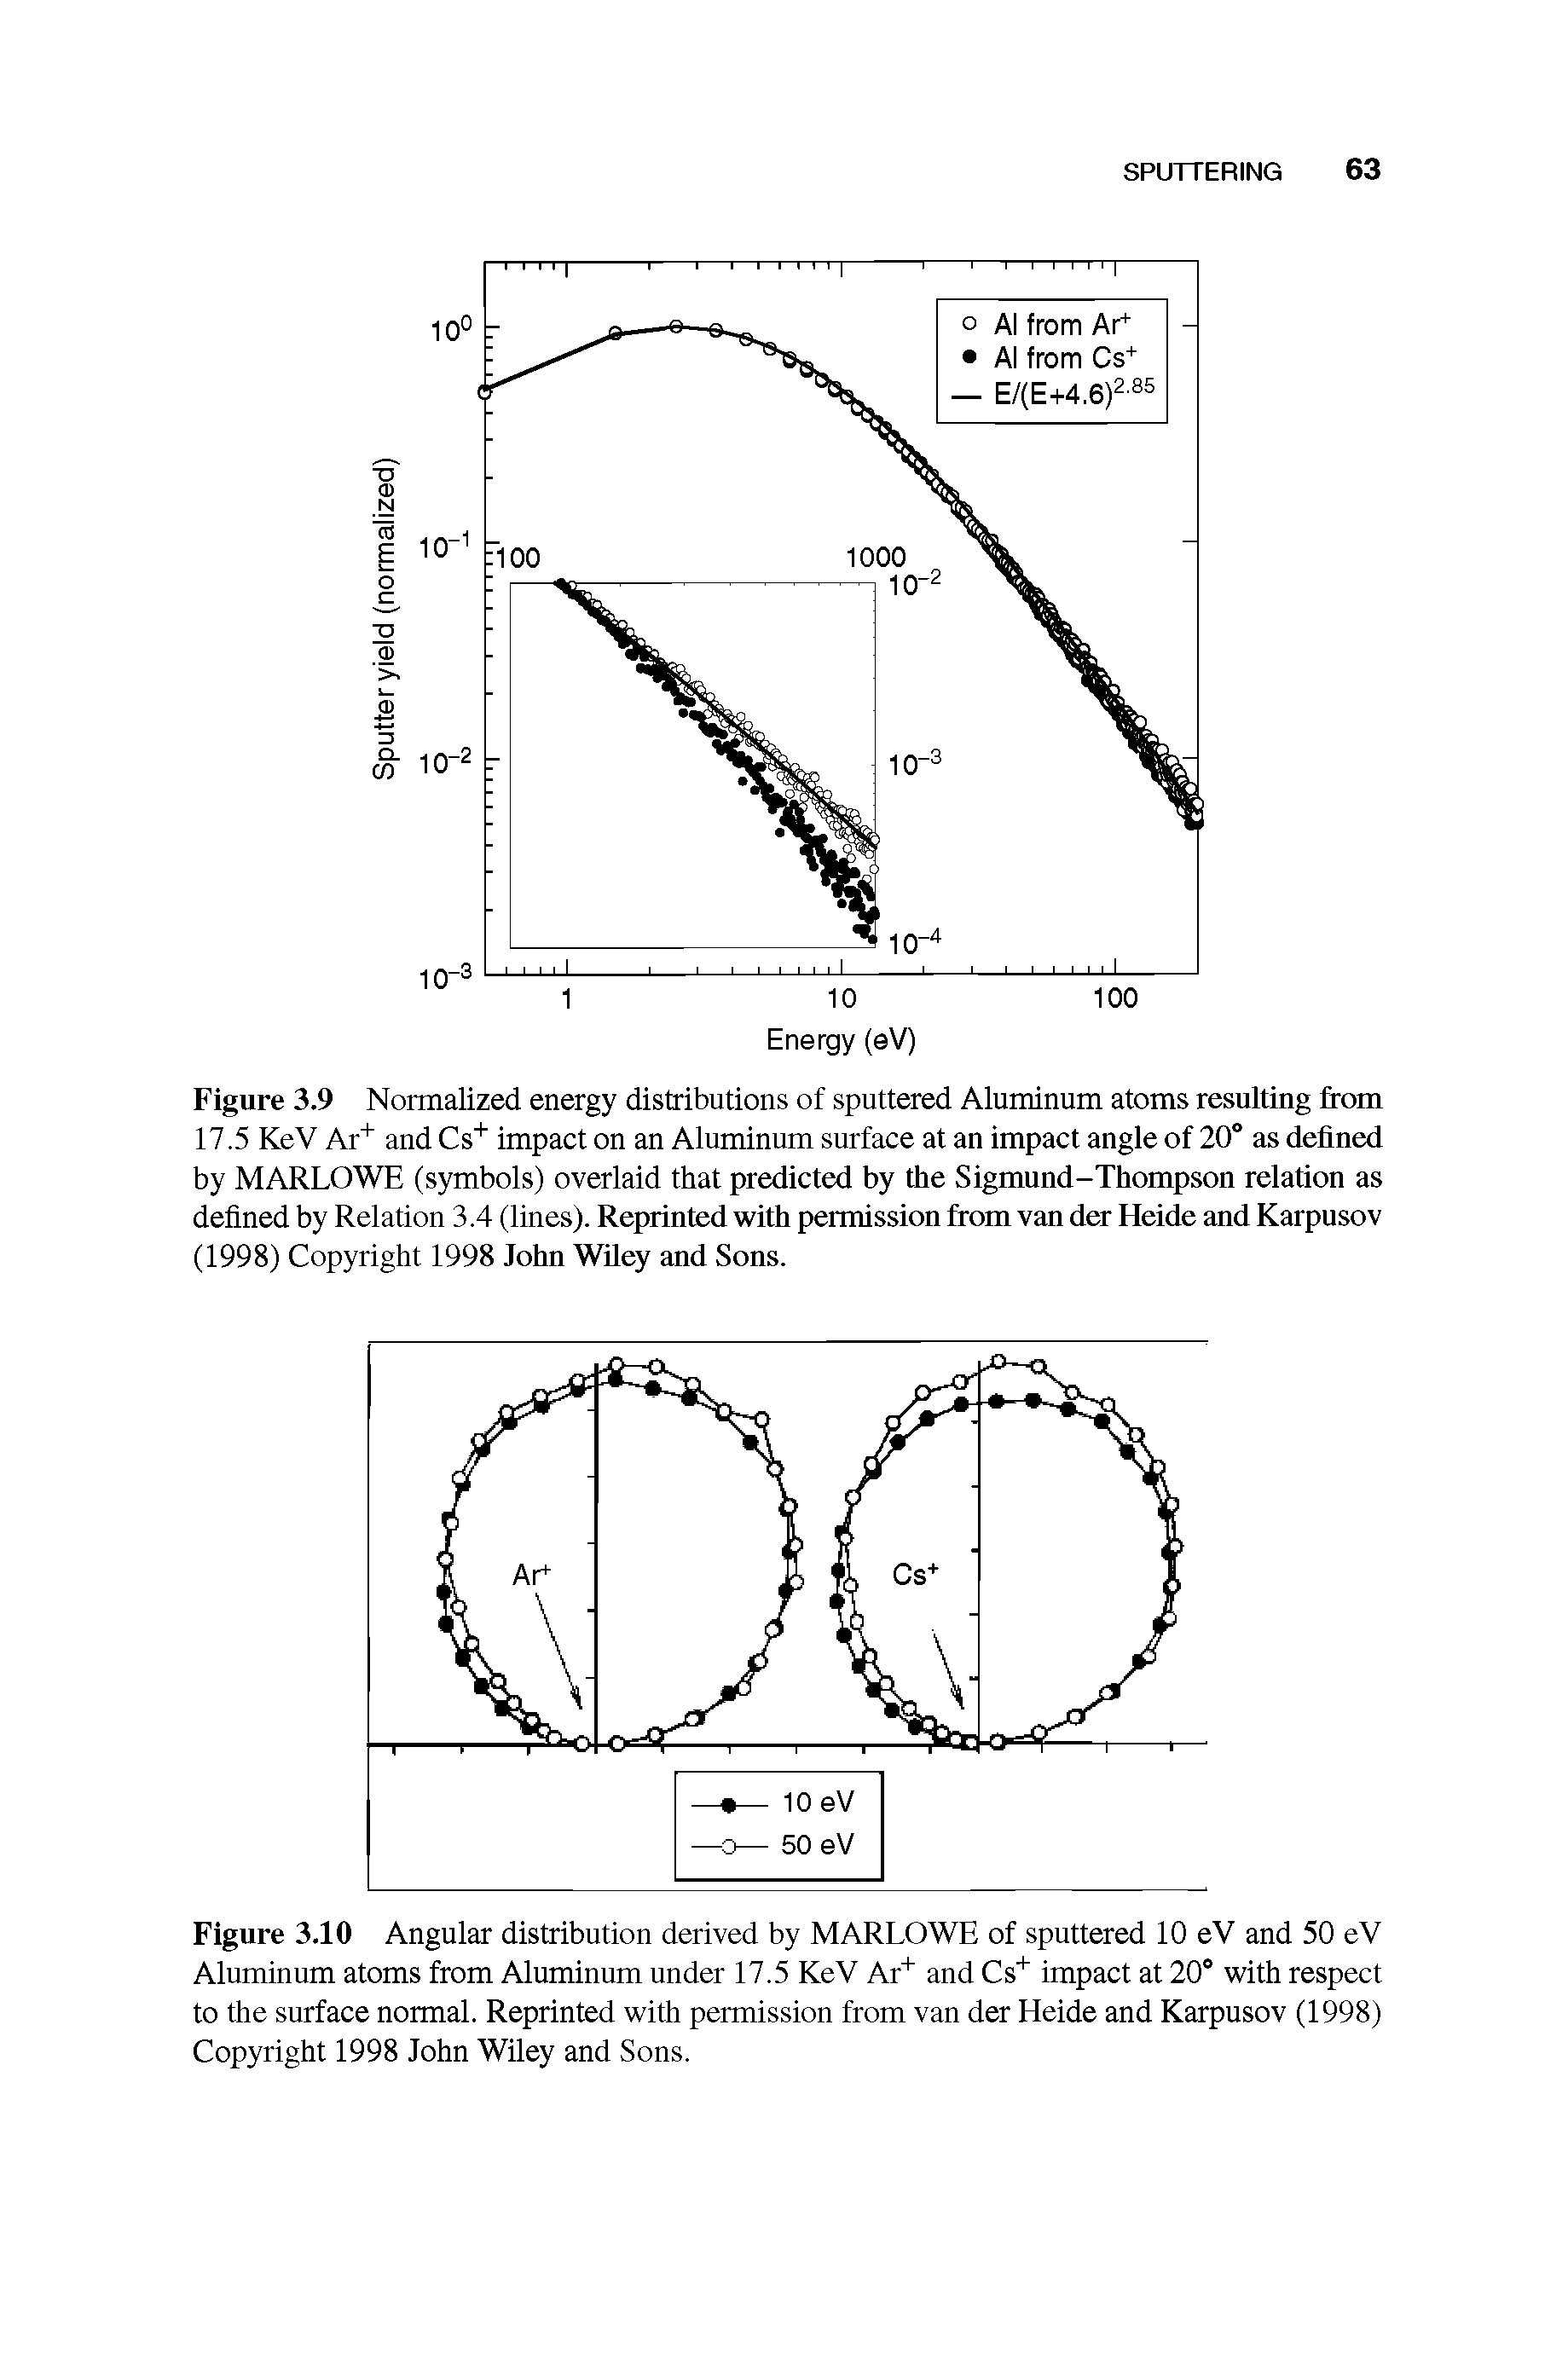 Figure 3.10 Angular distribution derived by MARLOWE of sputtered 10 eV and 50 eV Aluminum atoms from Aluminum under 17.5 KeV Ar and Cs impact at 20° with respect to the surface normal. Reprinted with permission from van der Heide and Karpusov (1998) Copyright 1998 John Wiley and Sons.